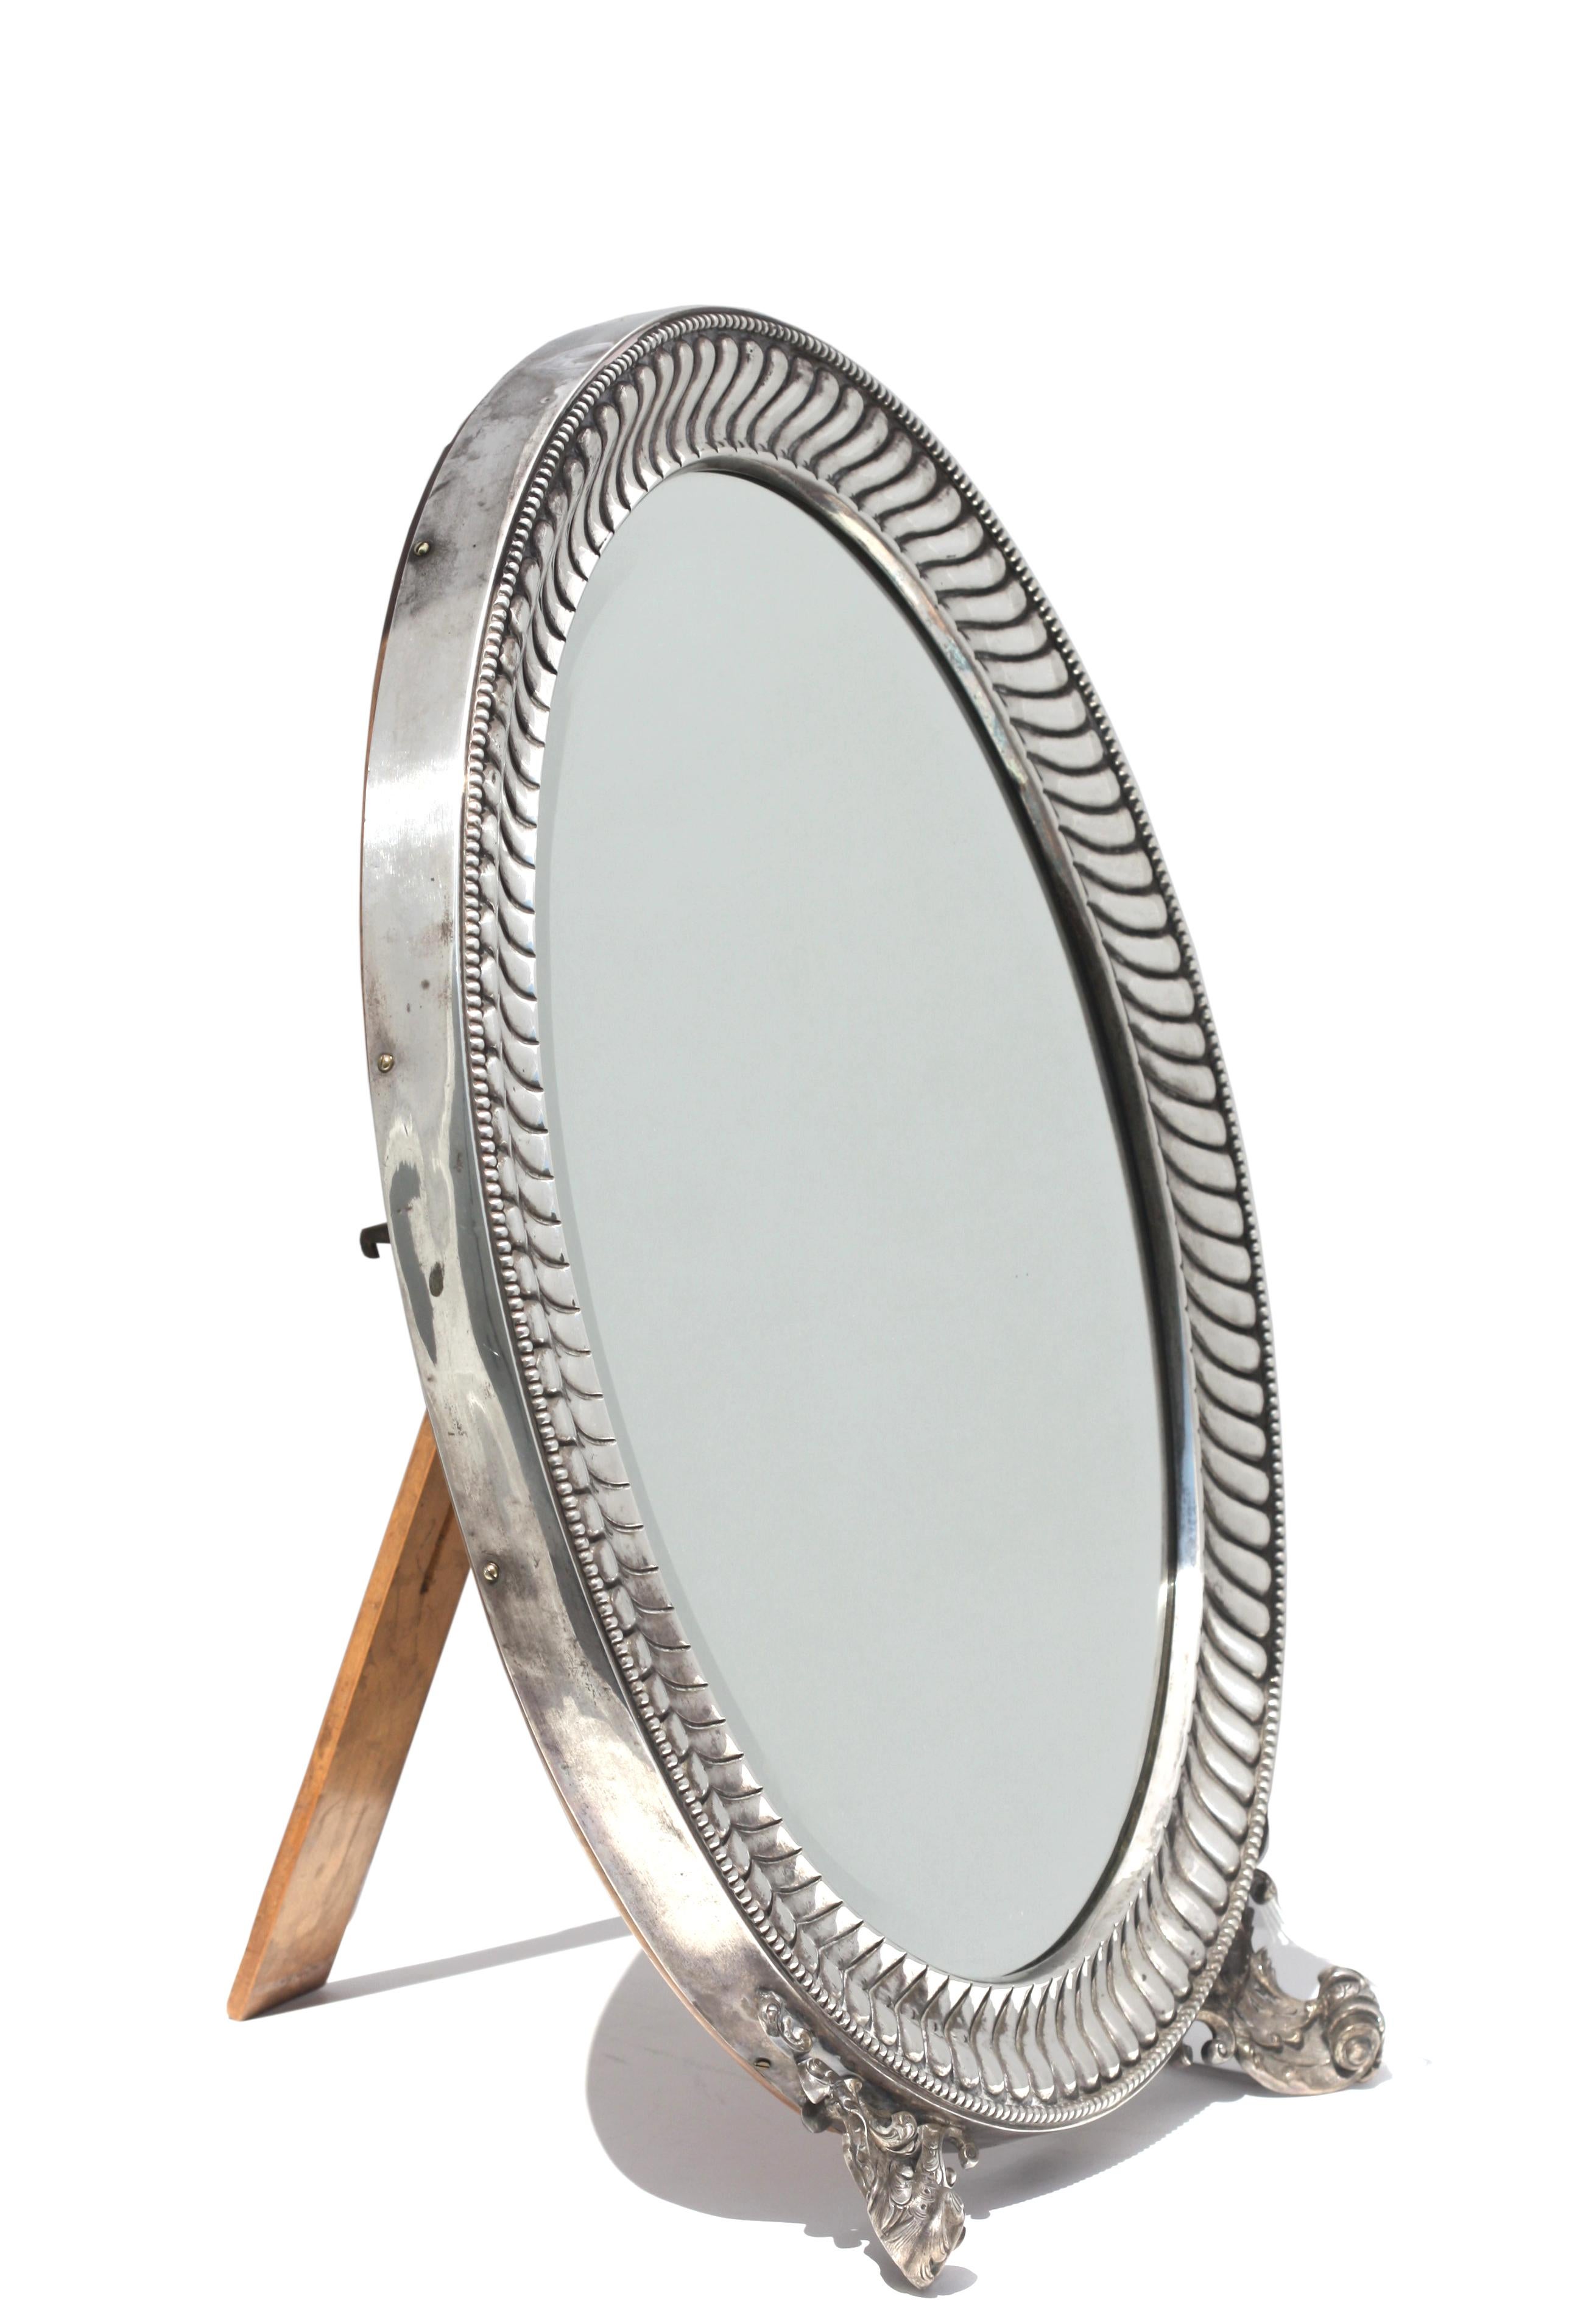 
Continental Neoclassical Silver Oval Dressing Mirror, 19th Century
Italian/French, marked. The oval swirled gadrooned surround with beaded border, on two foliate scrolled feet, with wood backing with hinged support. Height 18.75 in. (47.62 cm.),